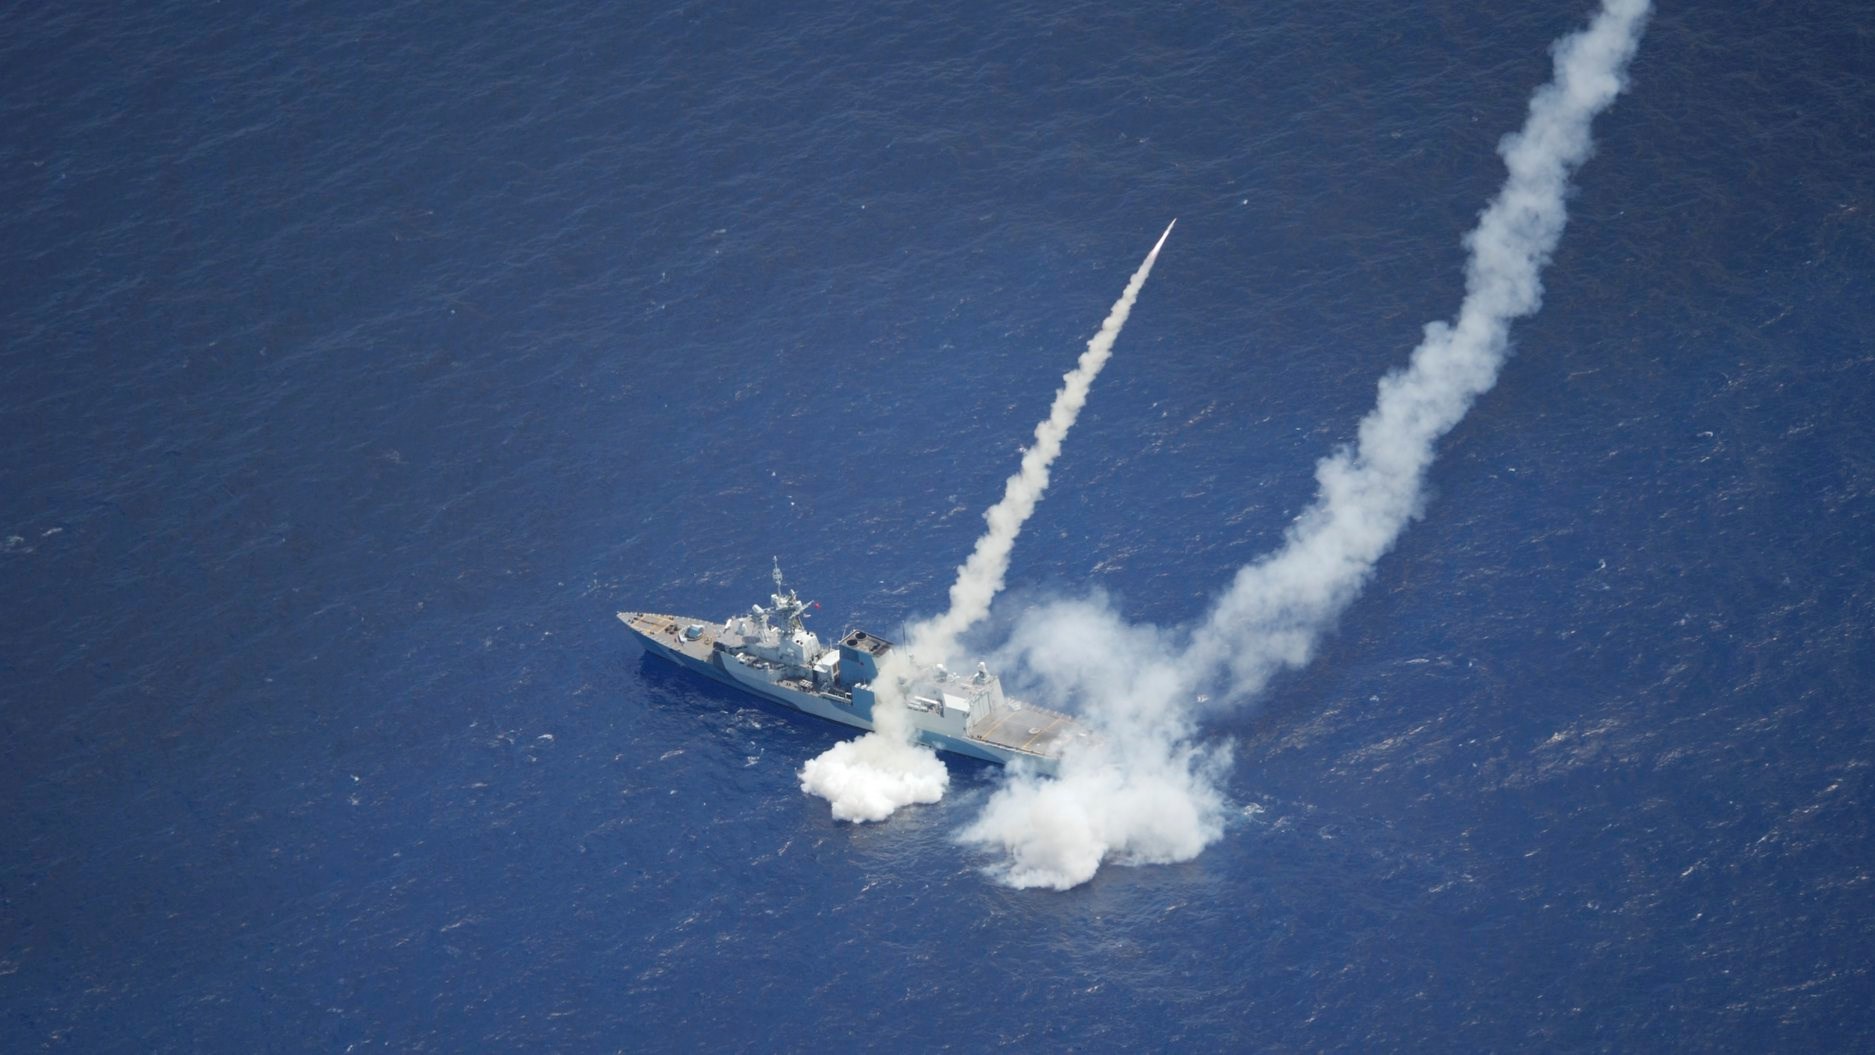 HMCS Regina fires two RGM-84 Harpoon Surface-to-Surface Missiles